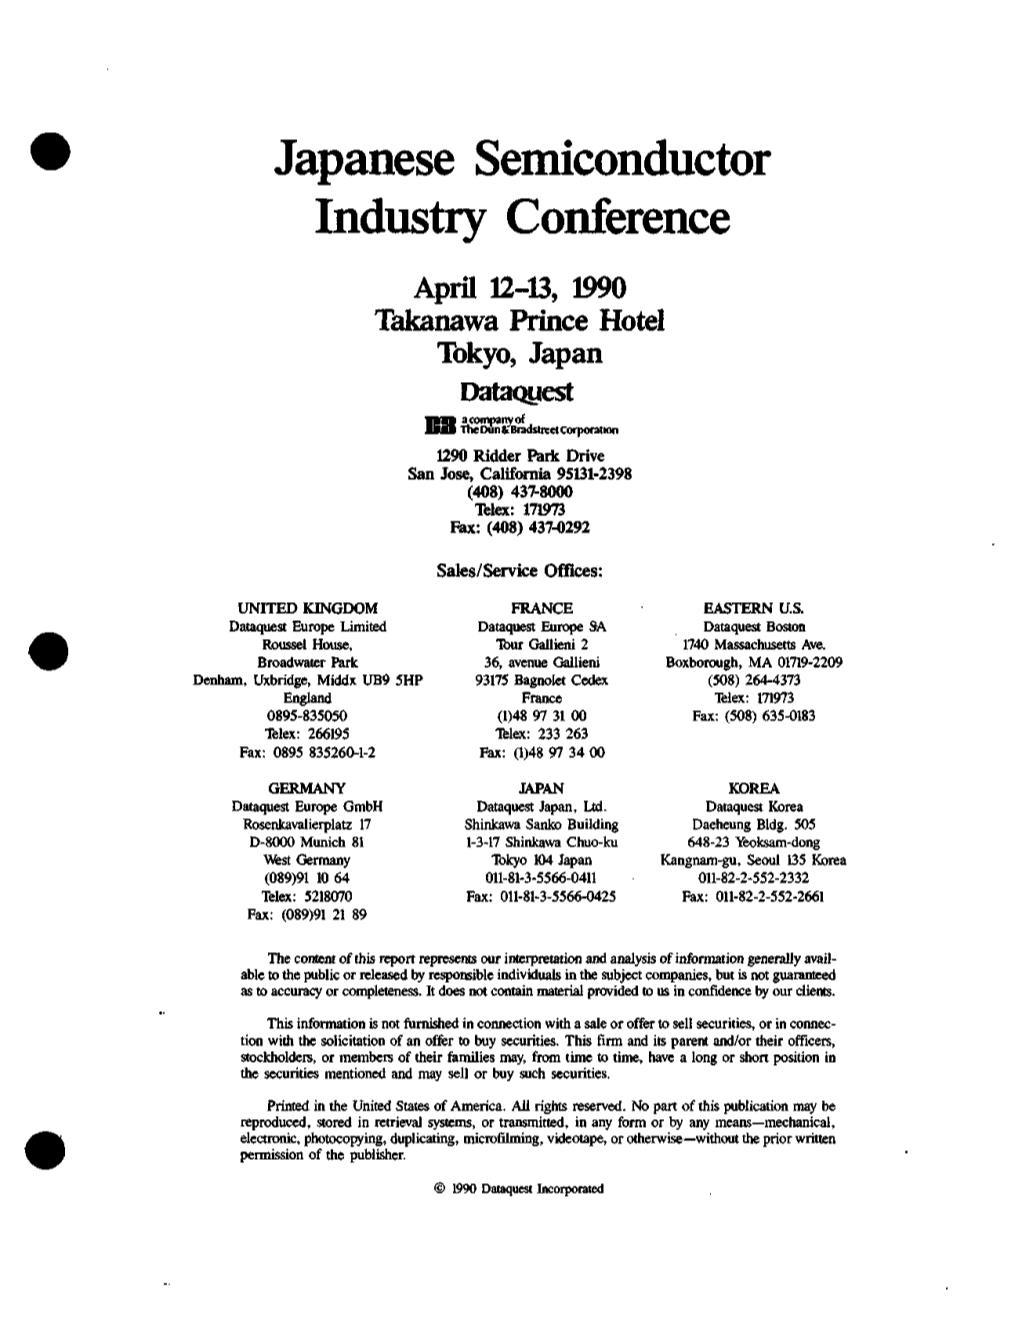 Japanese Semiconductor Industry Conference, 1990